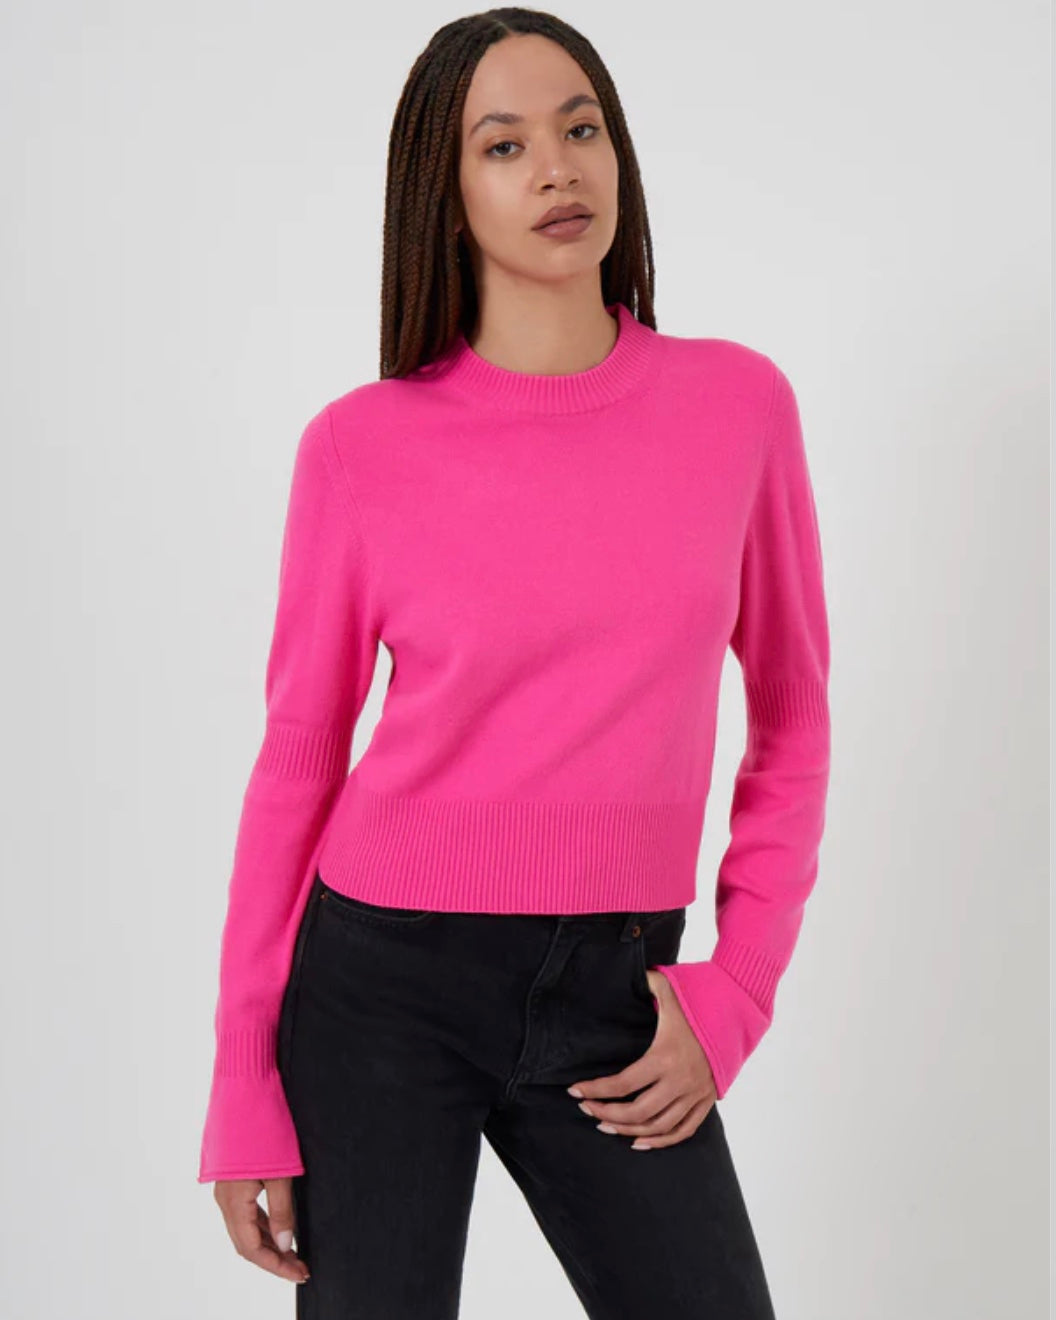 Model wearing French Connection Babysoft Crewneck Gather Jumper sweater in Prosecco pink wearing black jeans on a white background